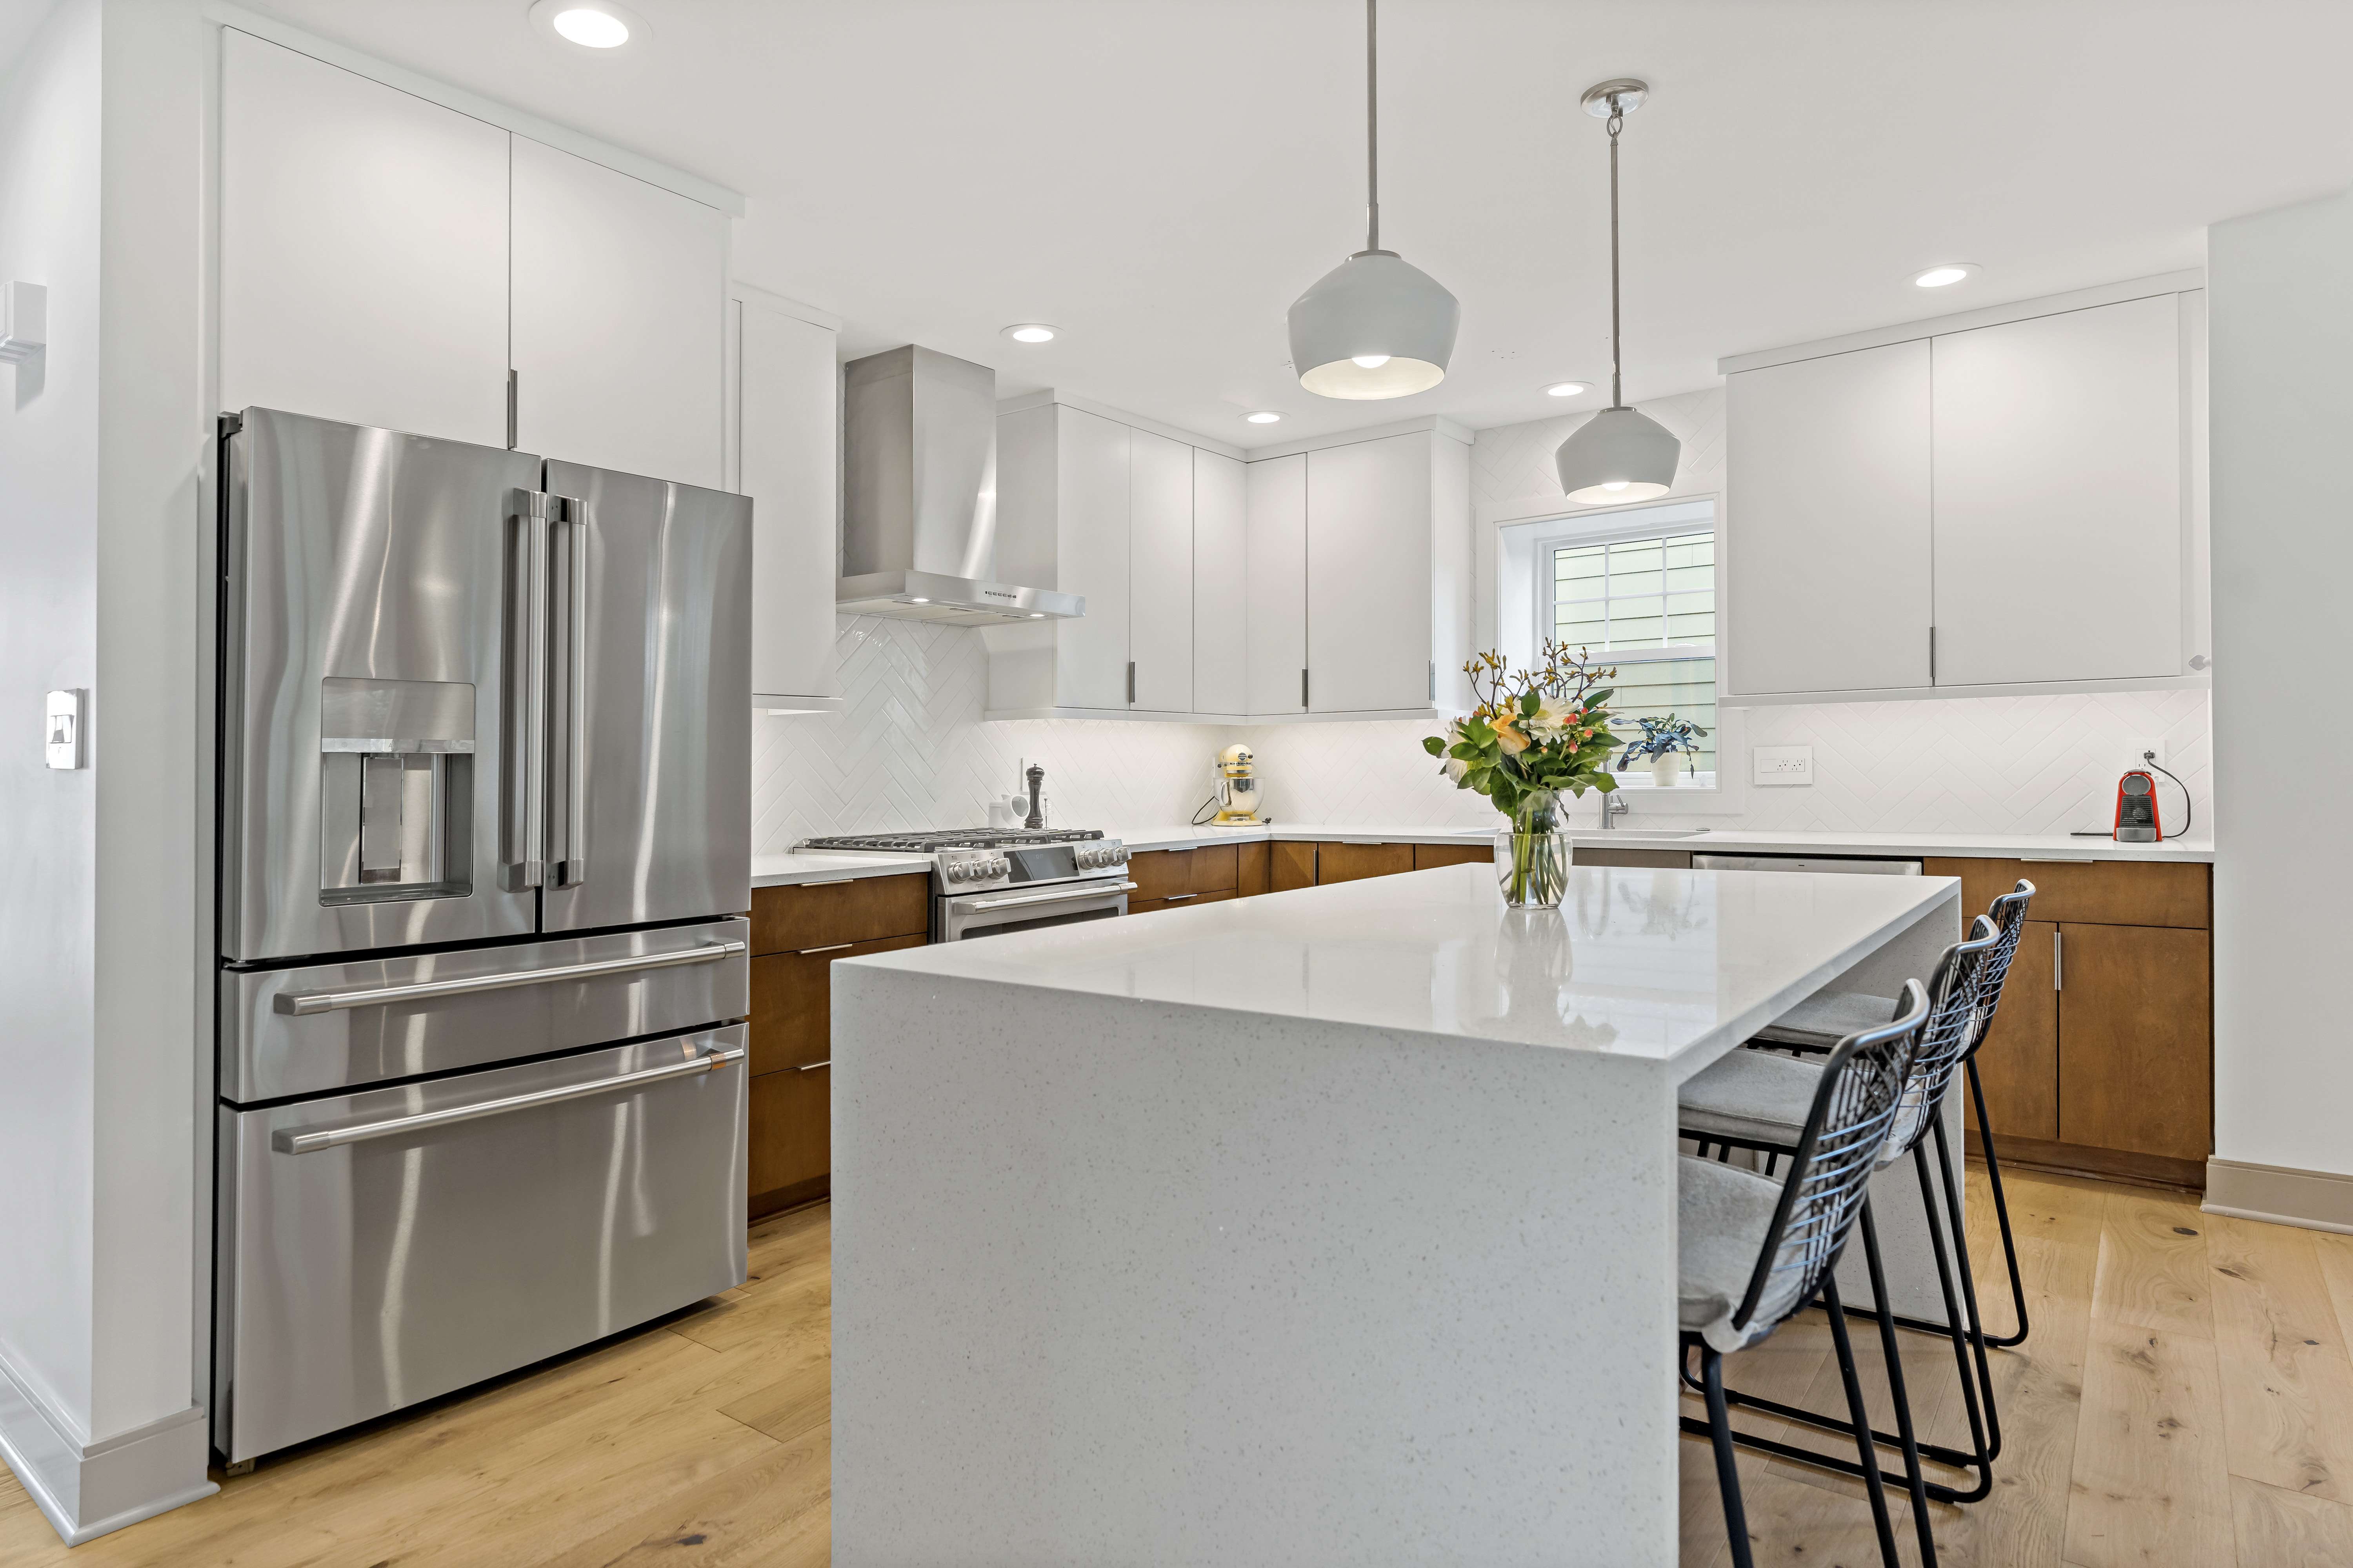 Silver appliances in white Arlington kitchen with hard wood floors